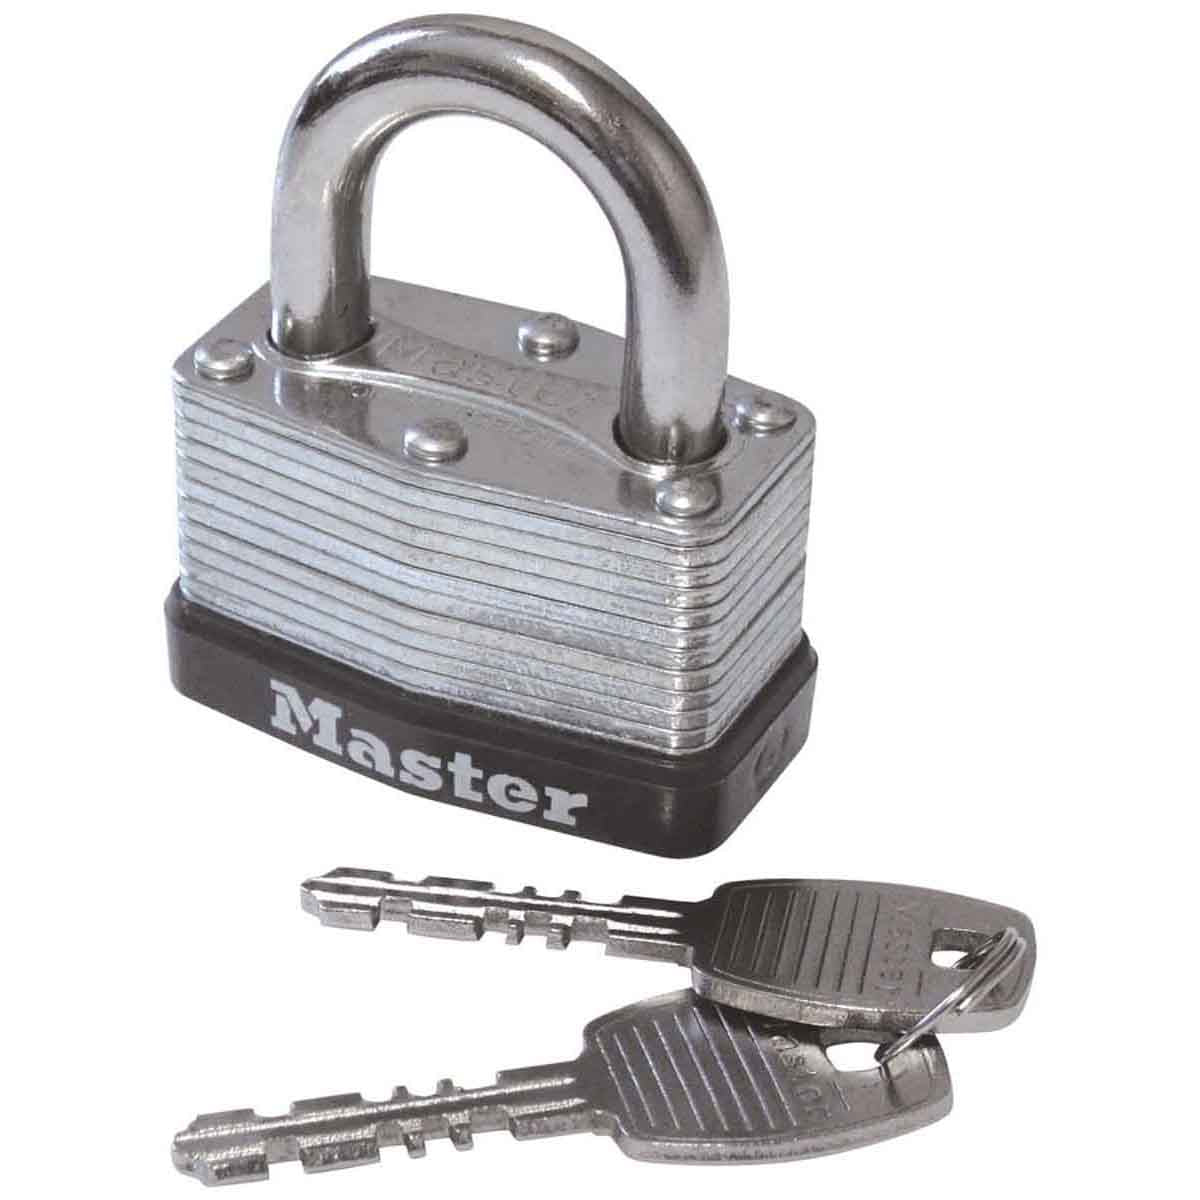 Lock and Keys for Cleat Boxes